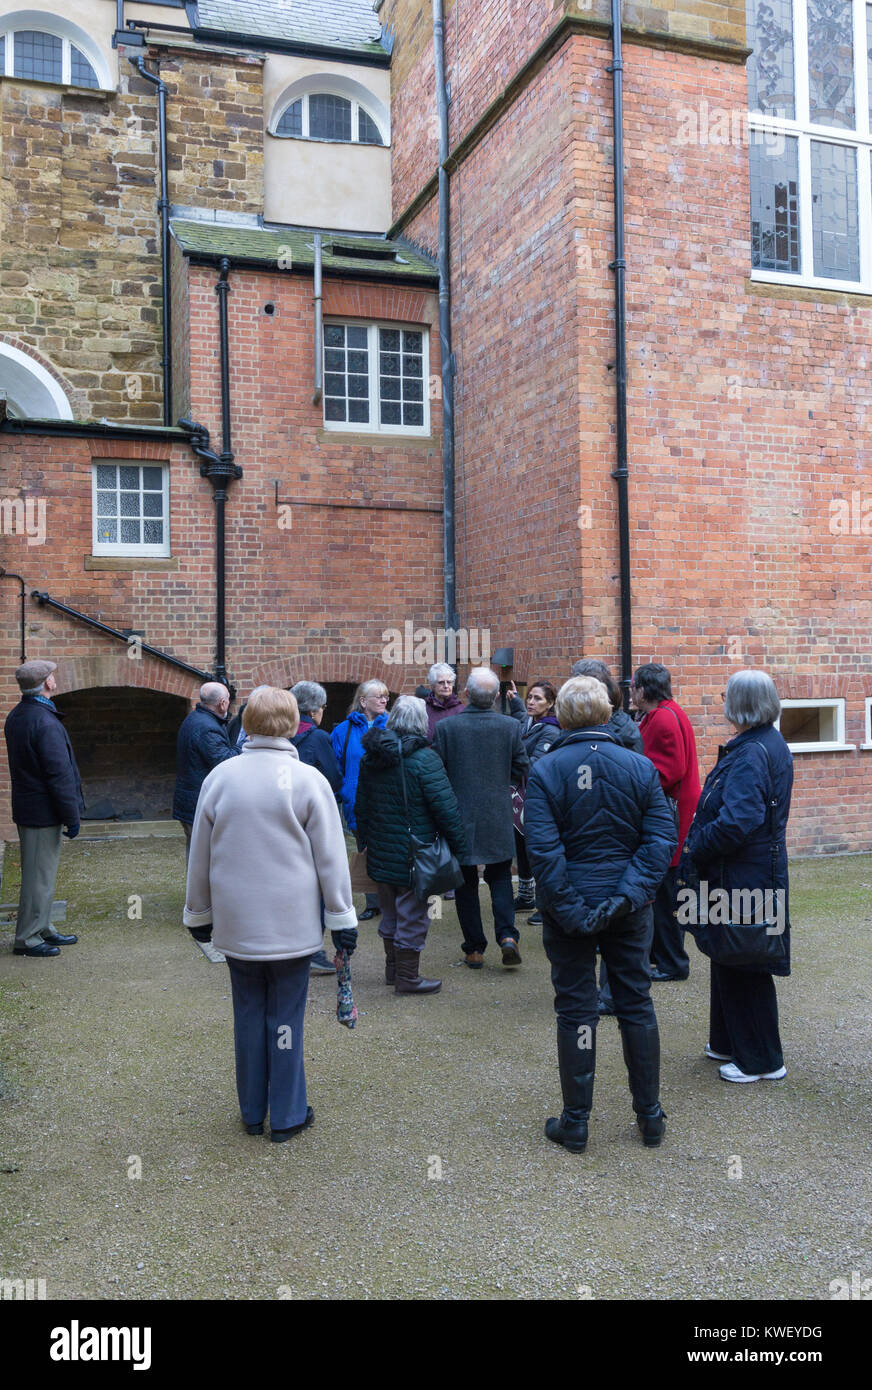 Group of seniors, members of a 50+ organisation, enjoying a guided tour of the newly restored Delapre Abbey, Northampton, UK Stock Photo